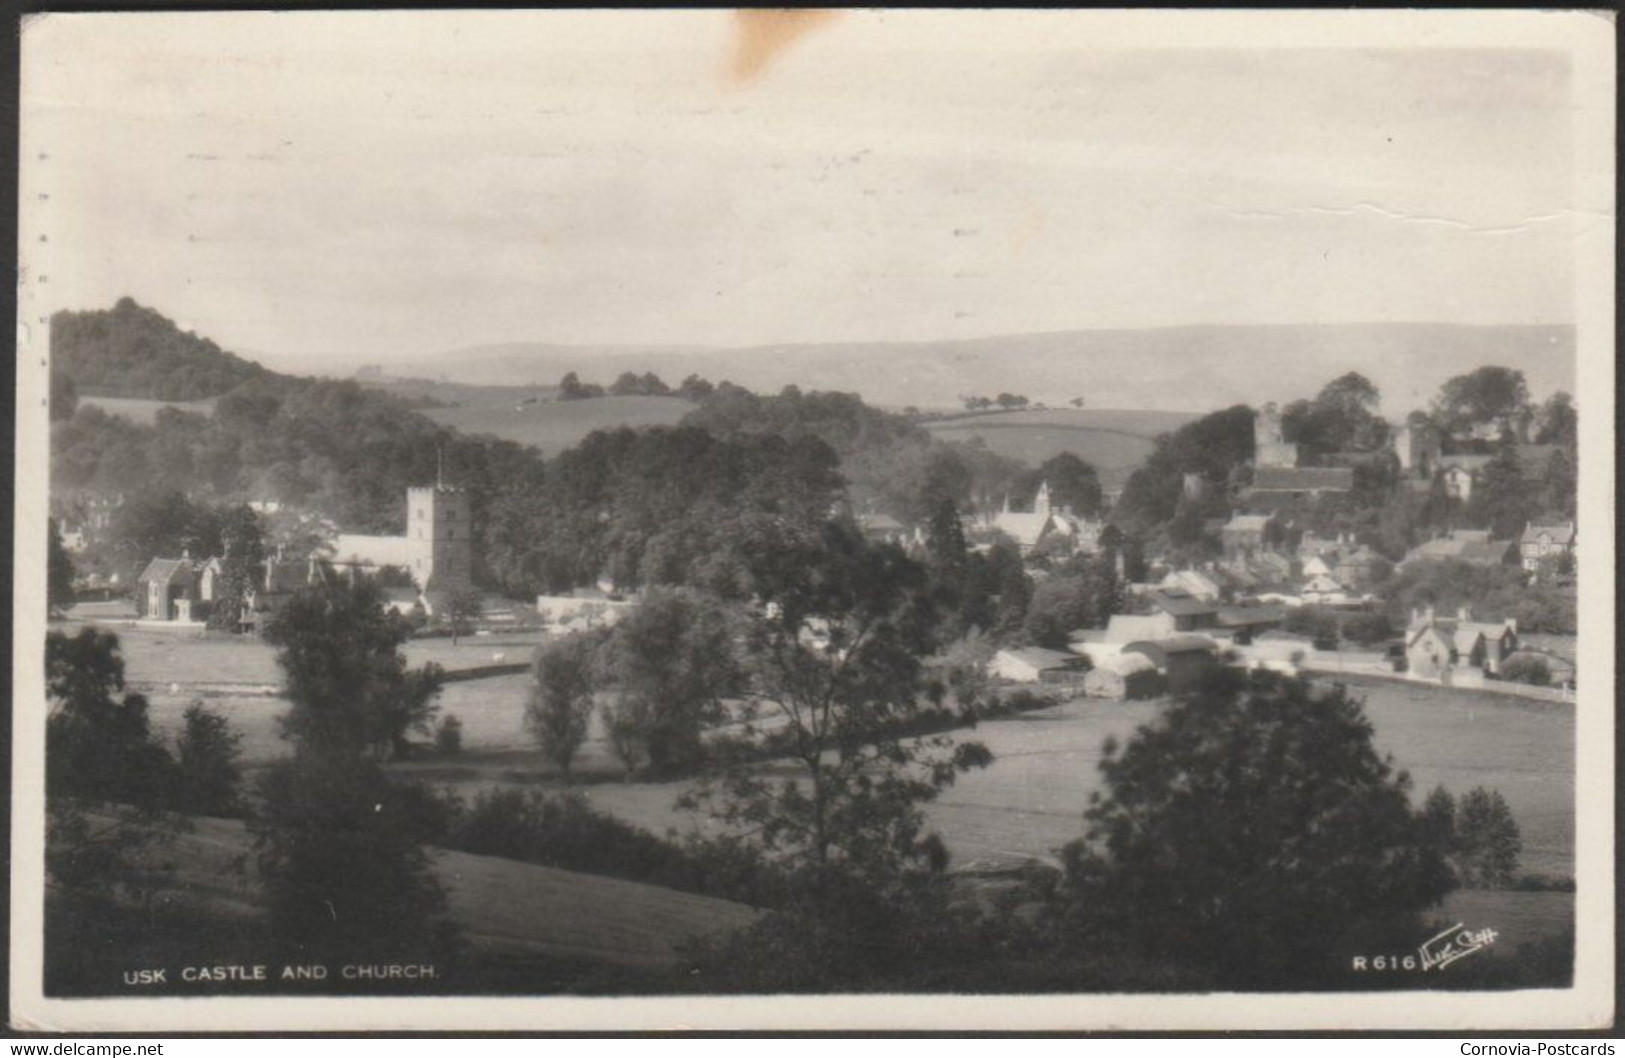 Usk Castle And Church, Monmouthshire, 1965 - Walter Scott RP Postcard - Monmouthshire